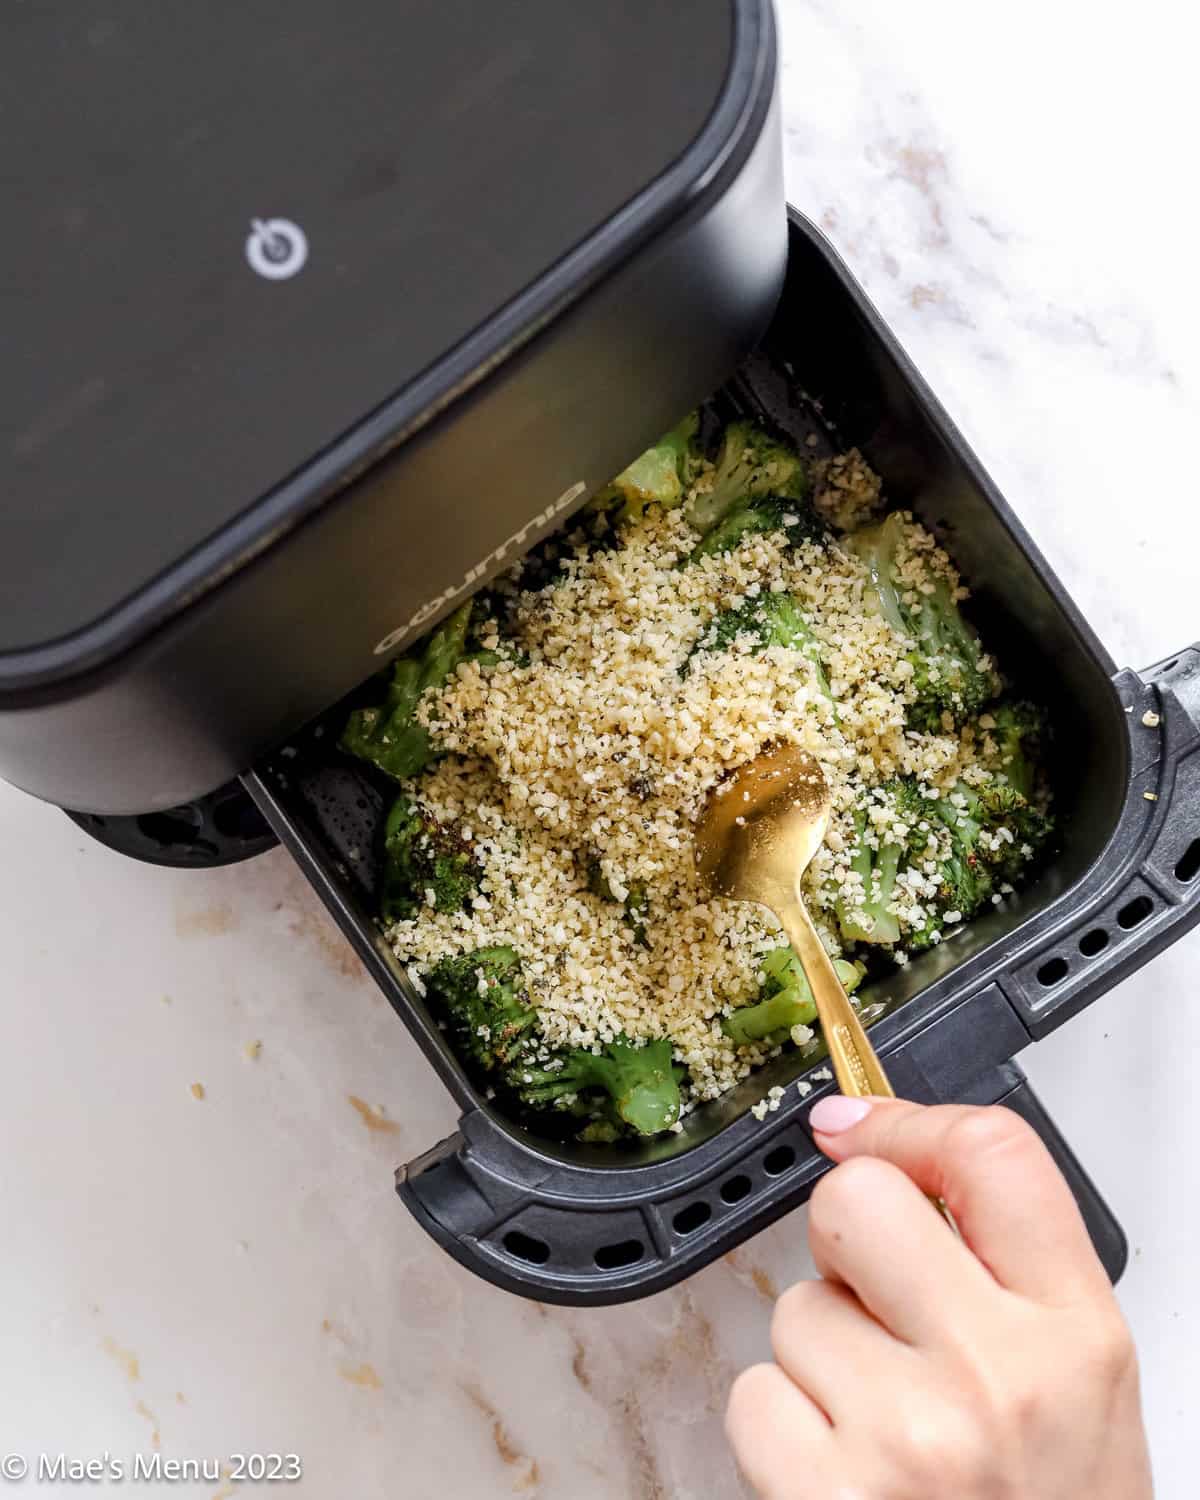 Spooning the breadcrumbs over the broccoli i the air fryer.